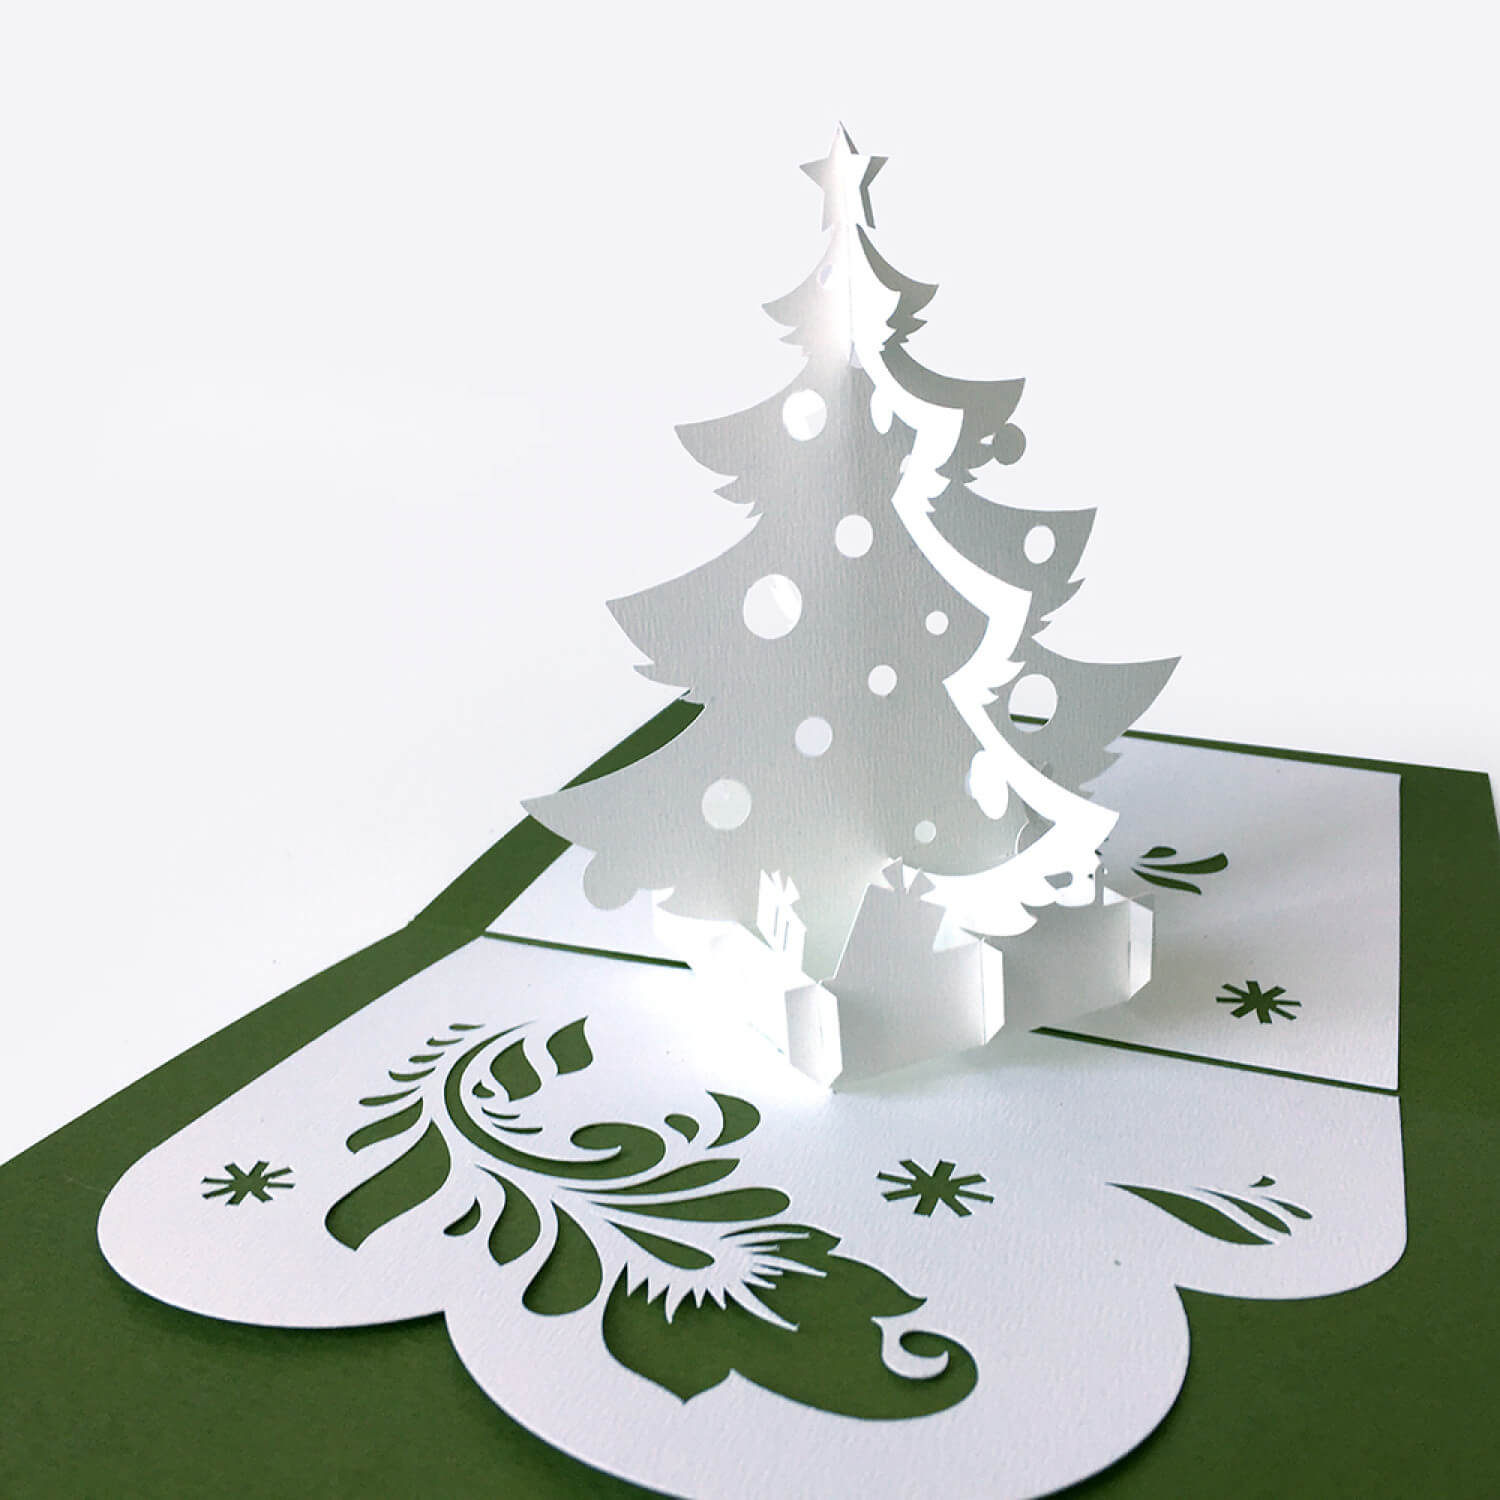 cby-handmade-christmas-greeting-card-with-paper-folded-3-d-pertaining